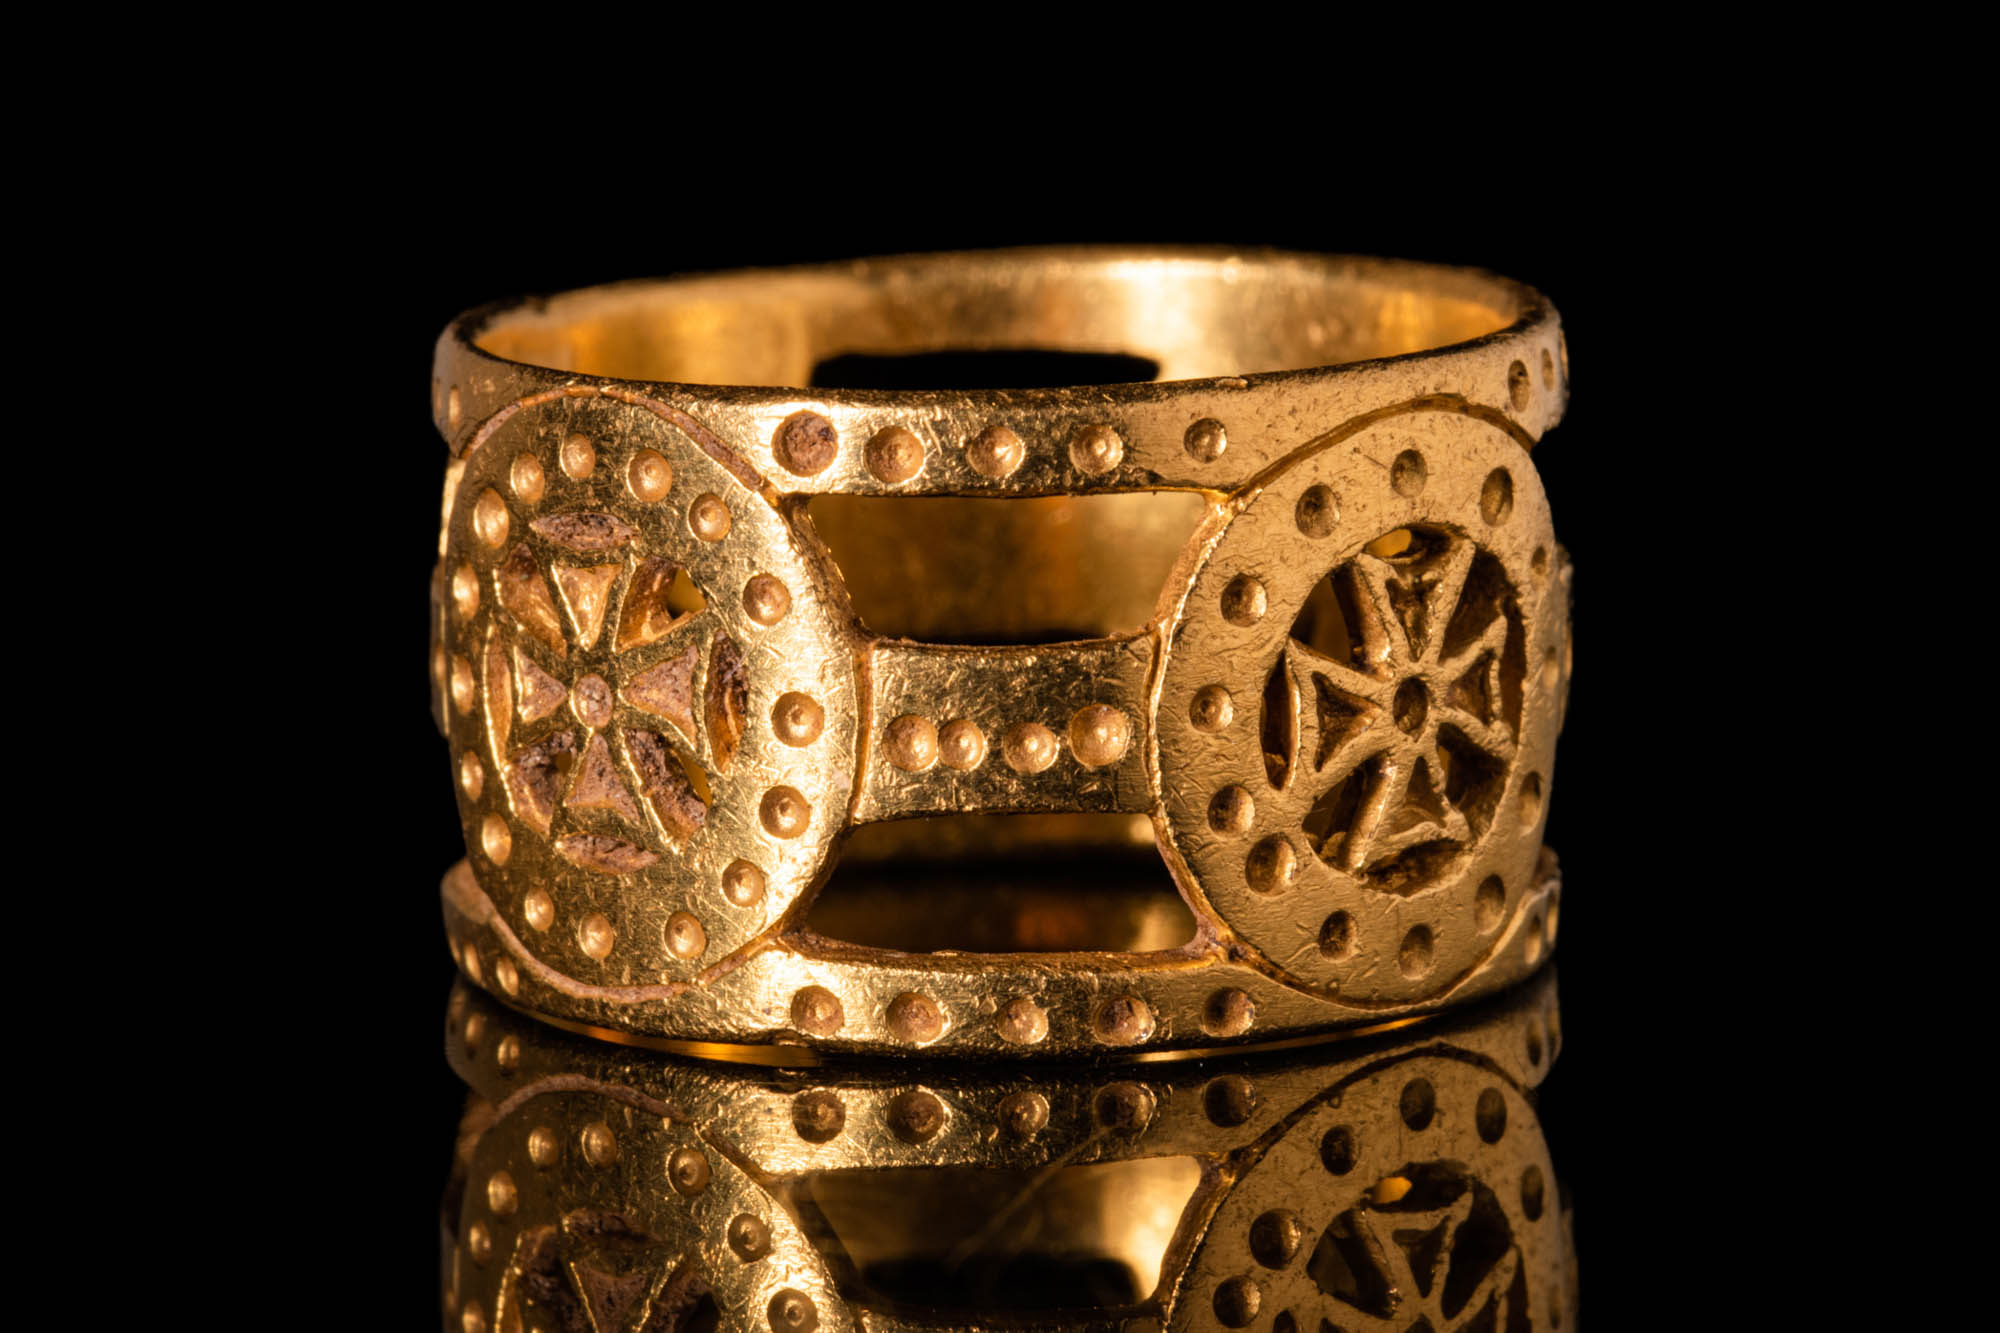 RARE BYZANTINE OPEN-WORK GOLD RING DEPICTING FOUR CROSSES - Image 2 of 4